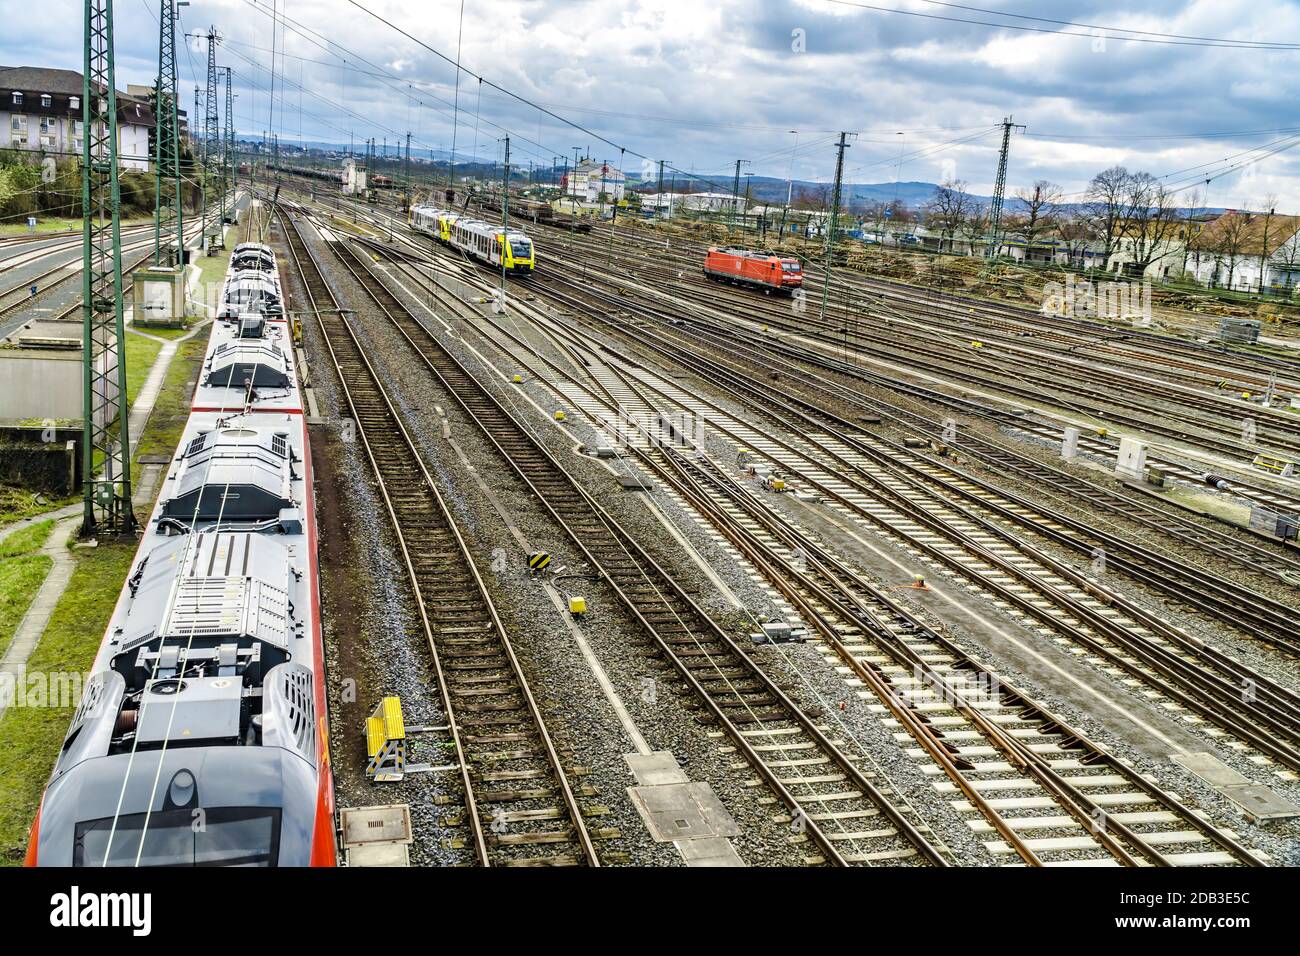 GIESSEN, GERMANY - APRIL 05, 2018: View of the railway station with a lot of Tracks and Train. Stock Photo